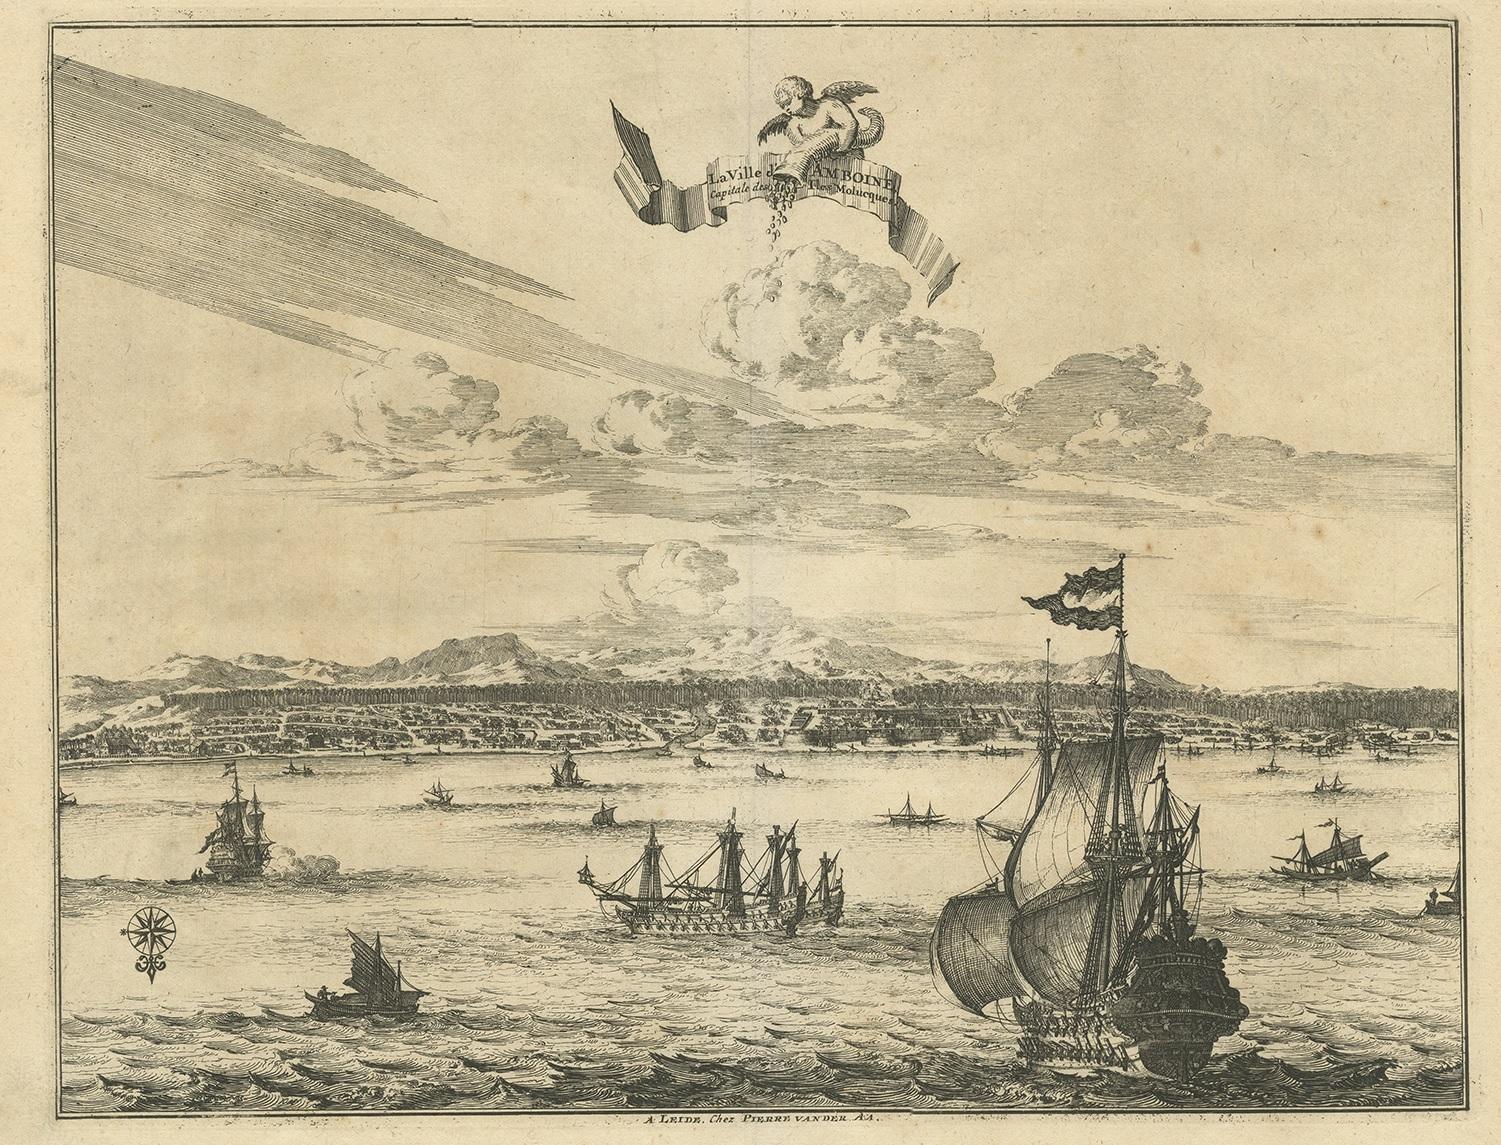 Antique print titled 'Ville d'Amboine, capitale des Iles Molucques.' This view shows Amboina, the capital of the Molucca Islands, Indonesia. In the foreground several VOC and local ships. This print originates from the very scarse: 'La galerie